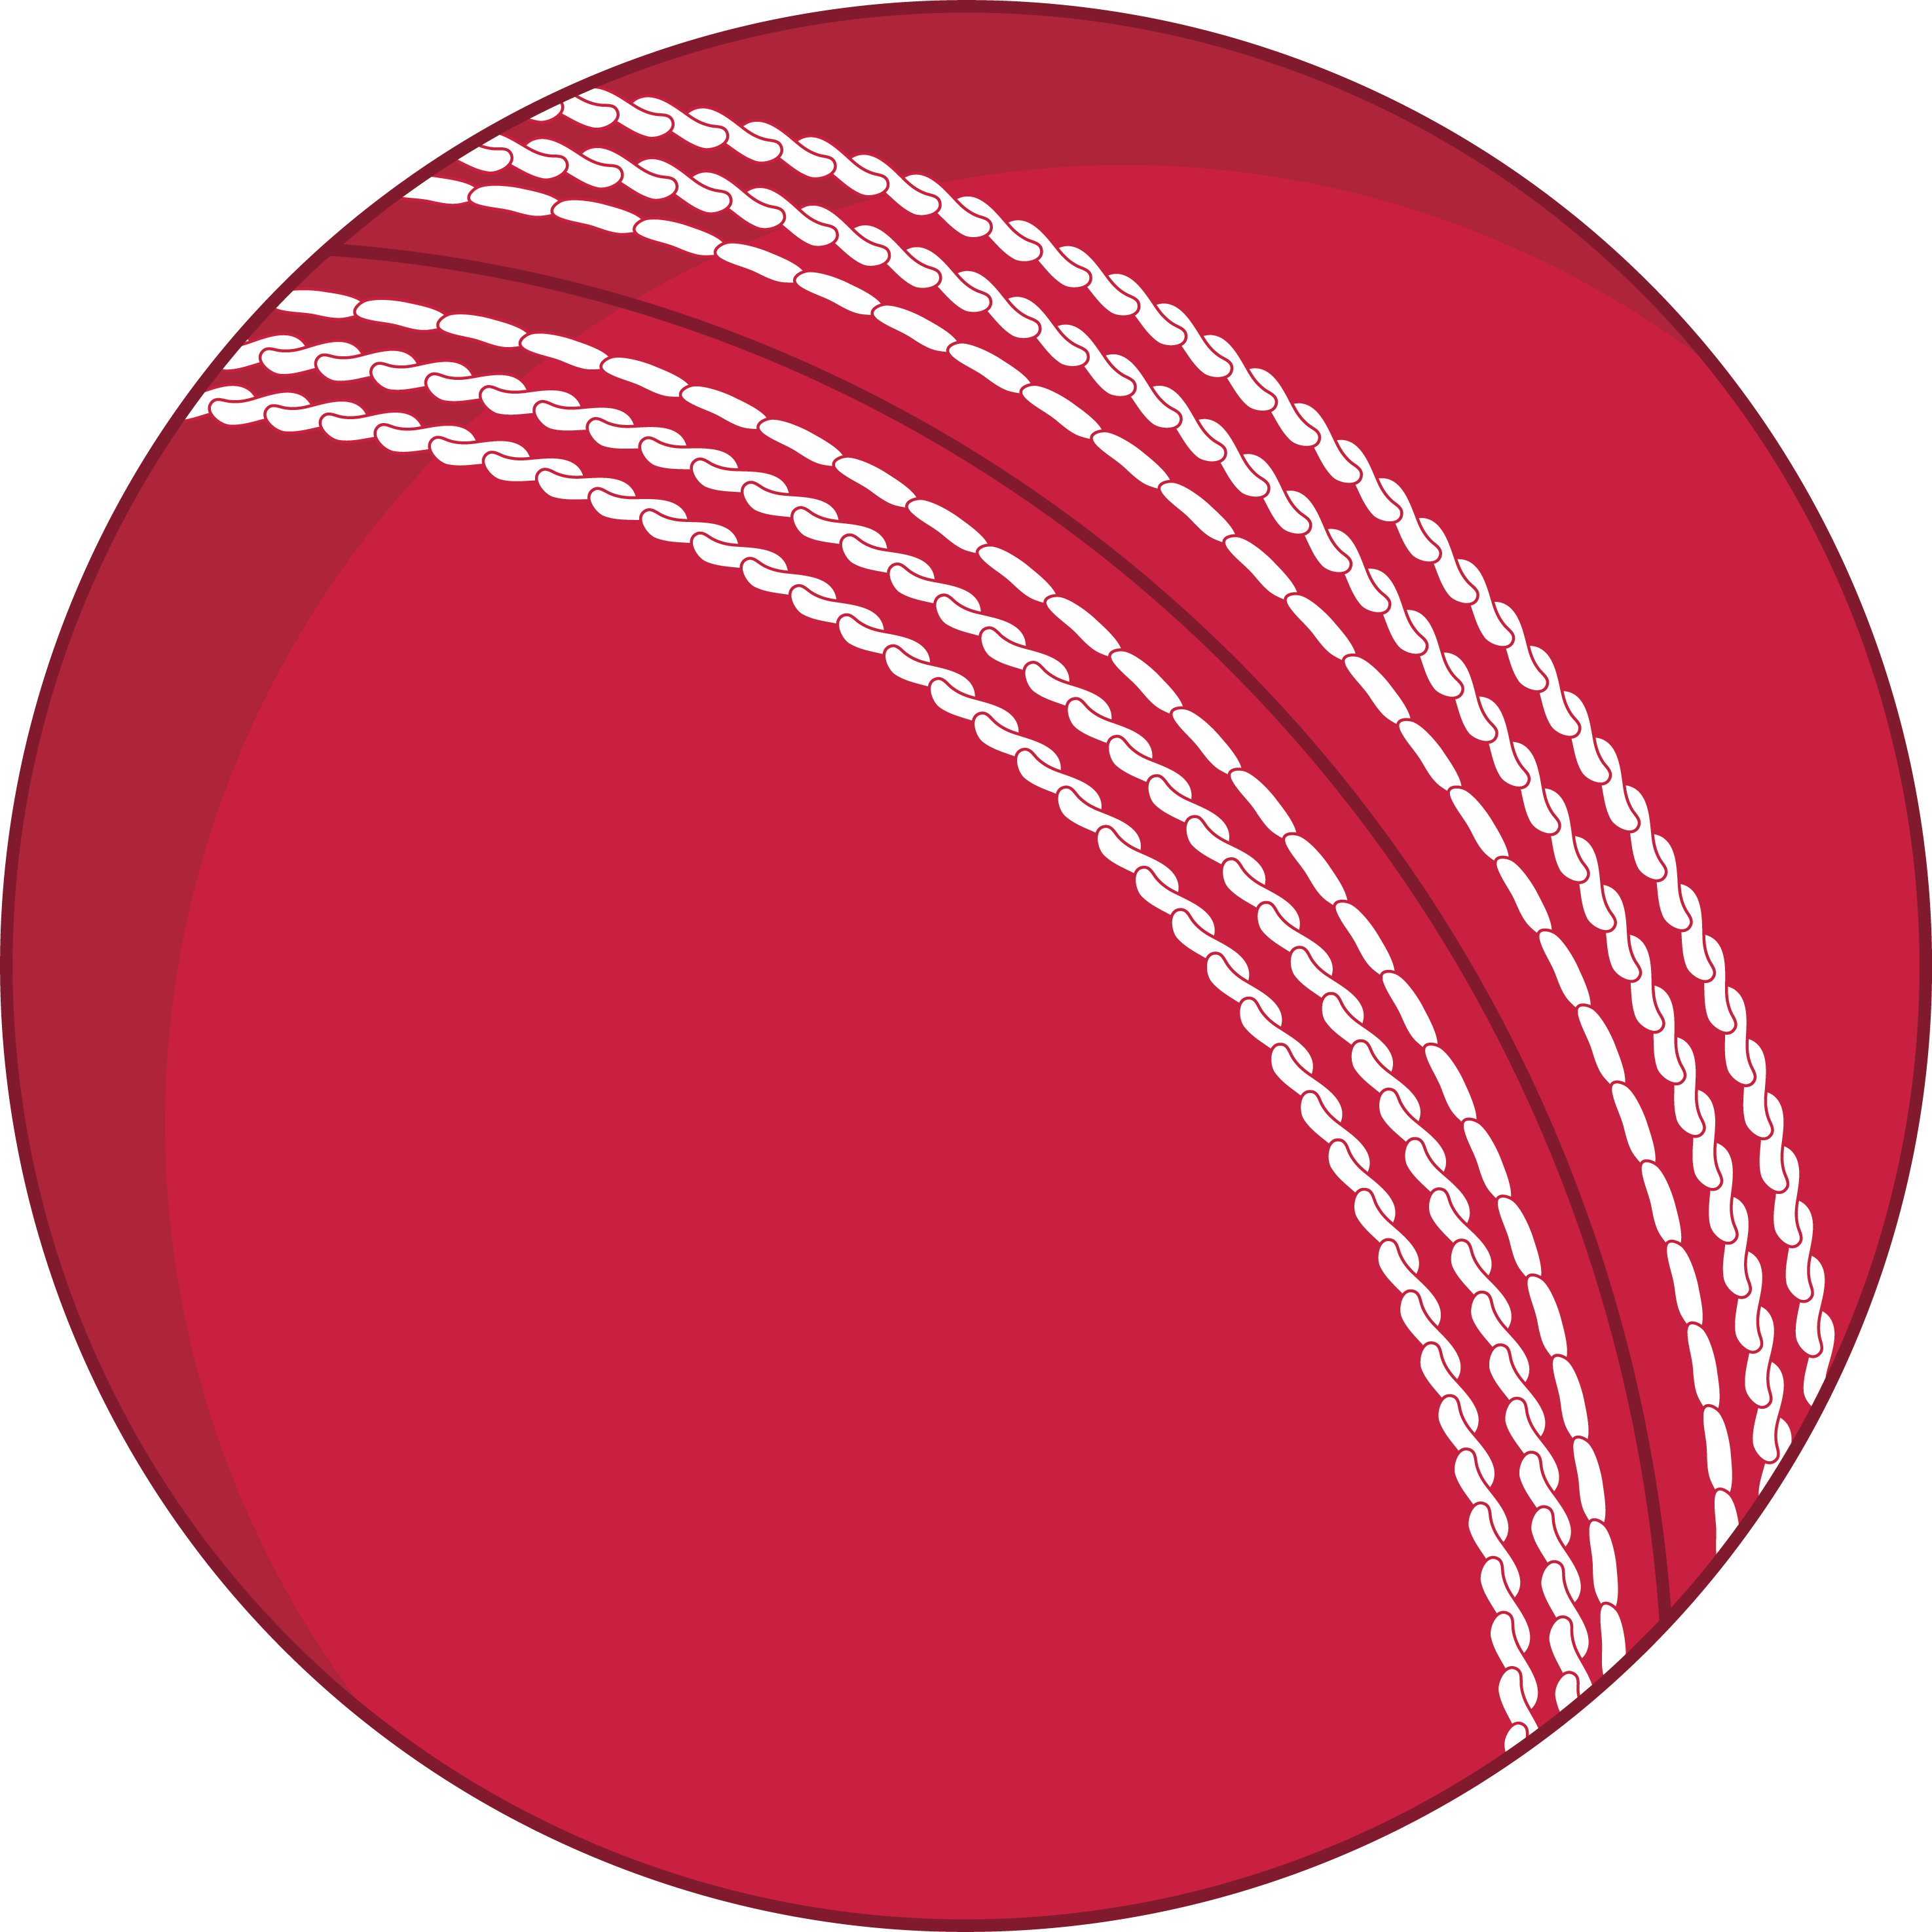 Cricket Ball PNG Free Download